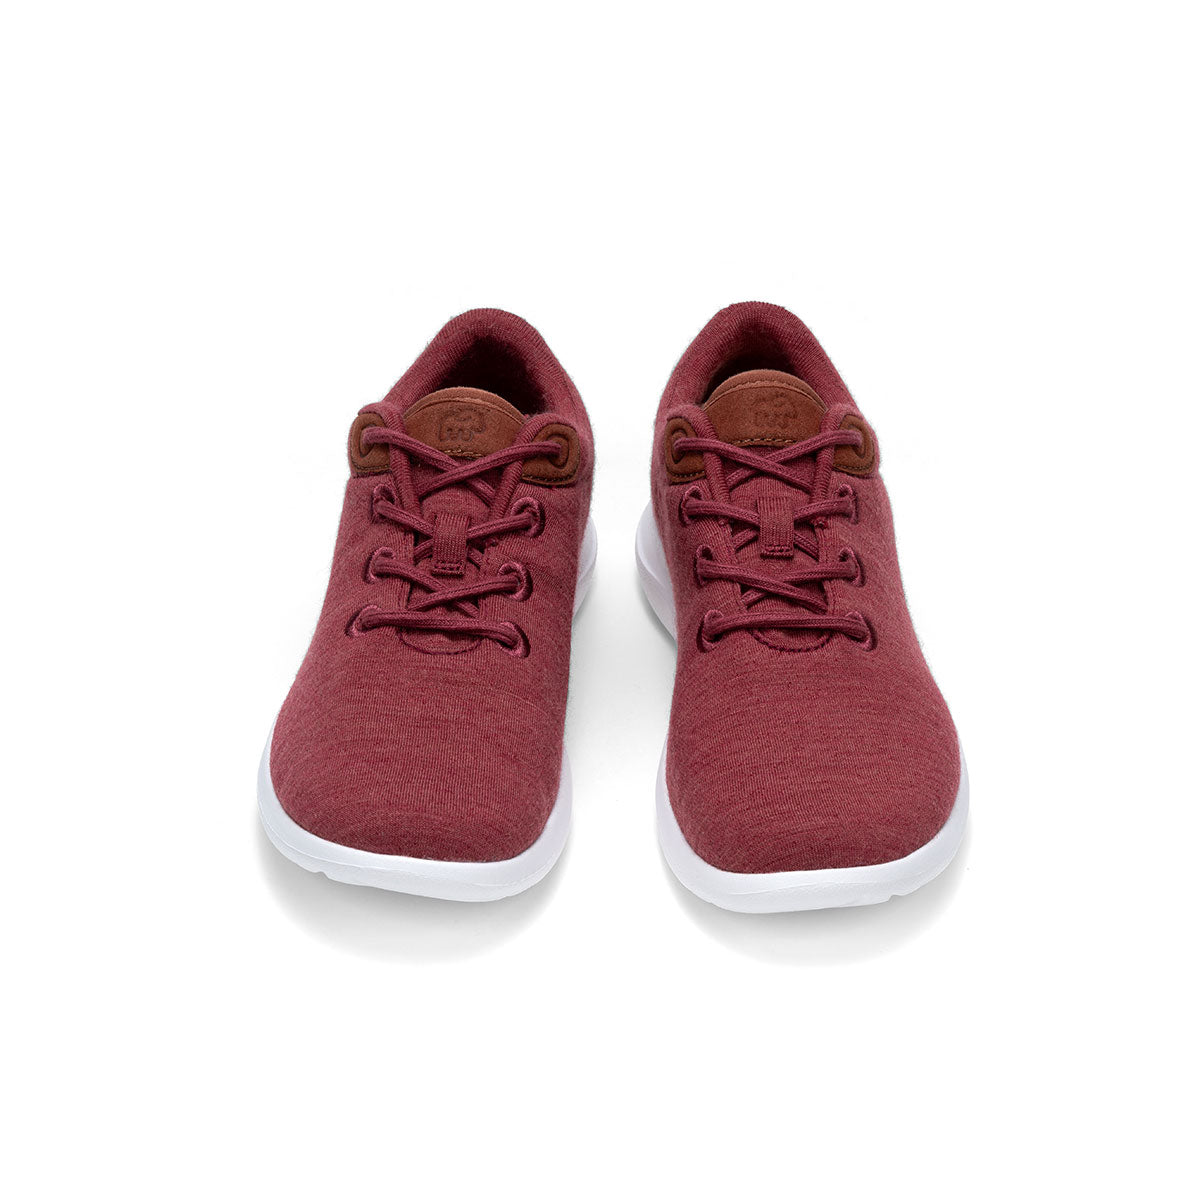 Women's Lace-Ups Tuscan Red